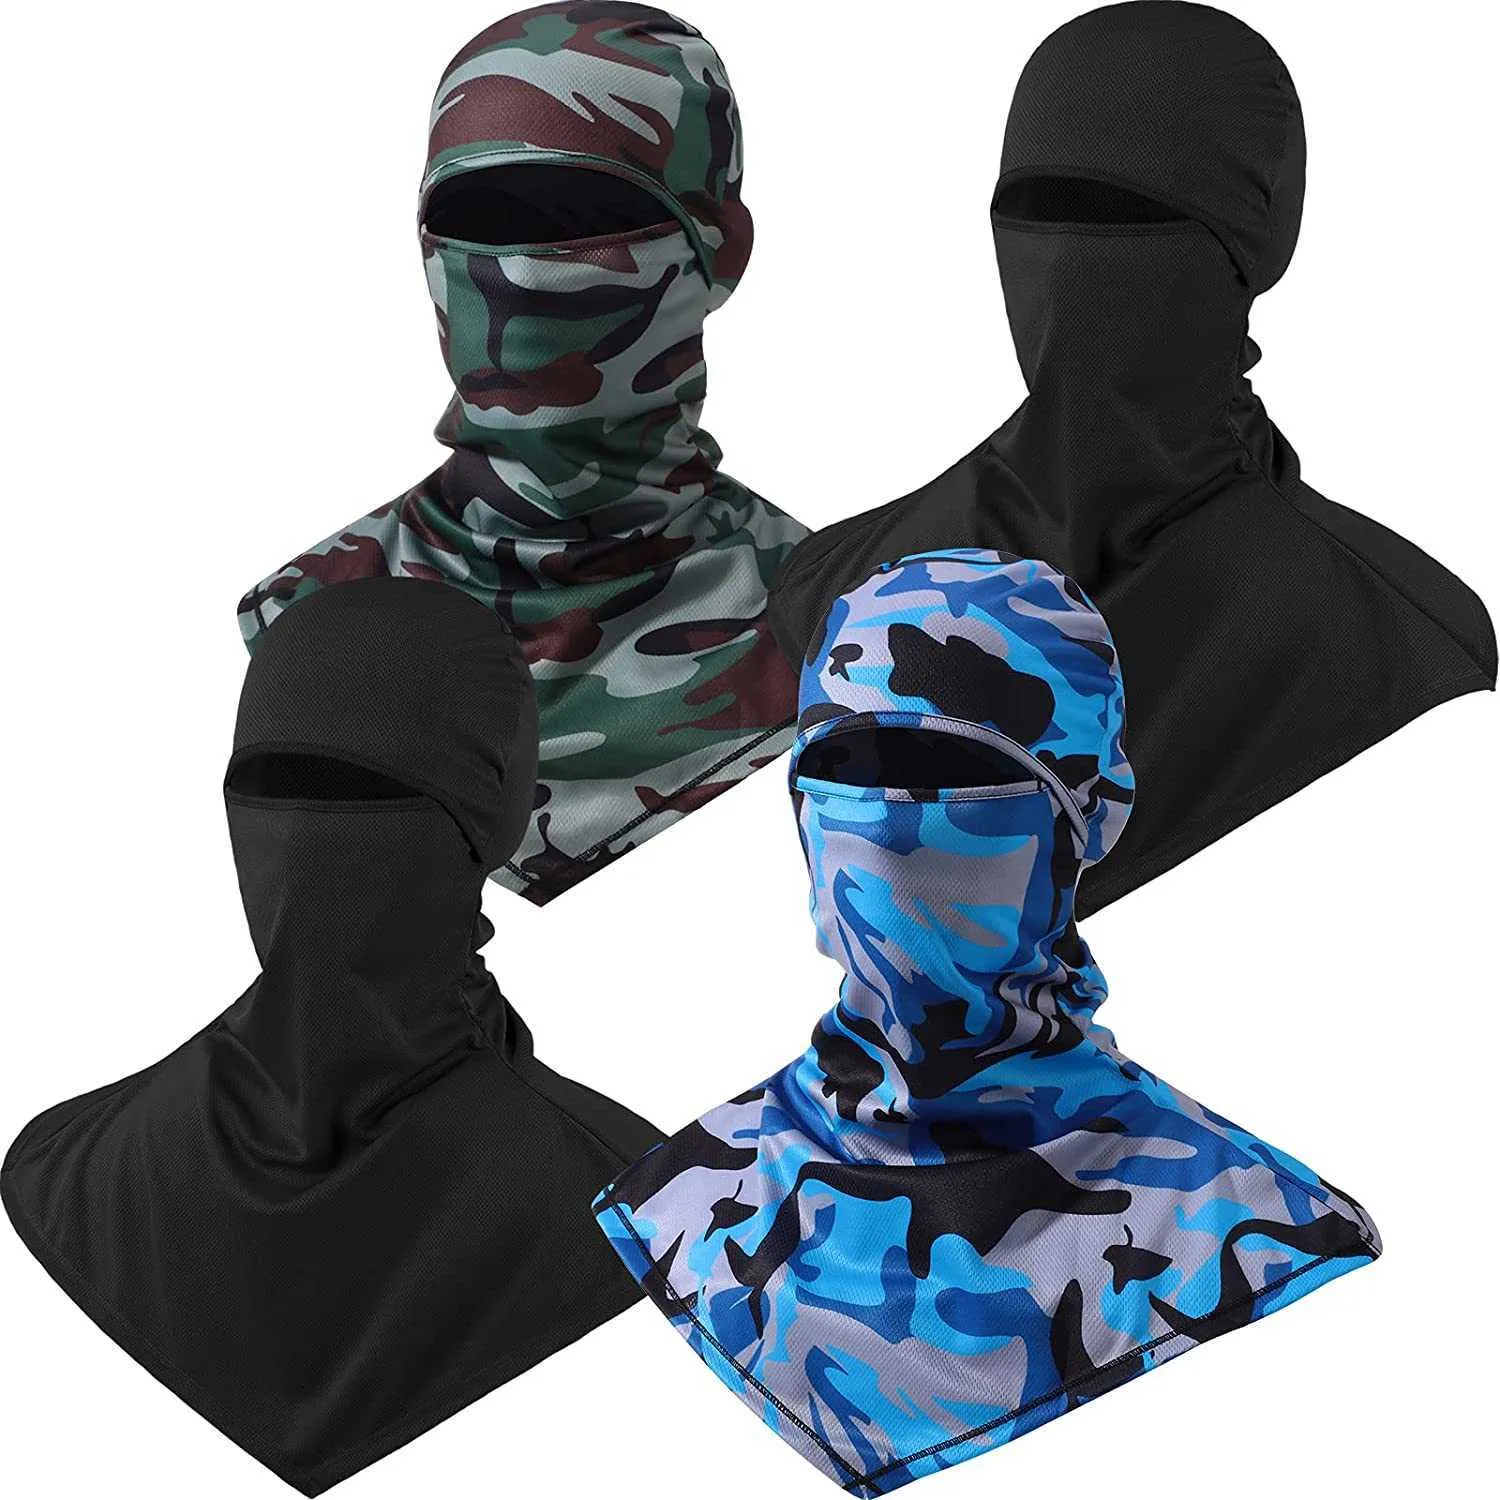 Breathable Balaclava Face Mask For Sun Protection Long Neck Covers